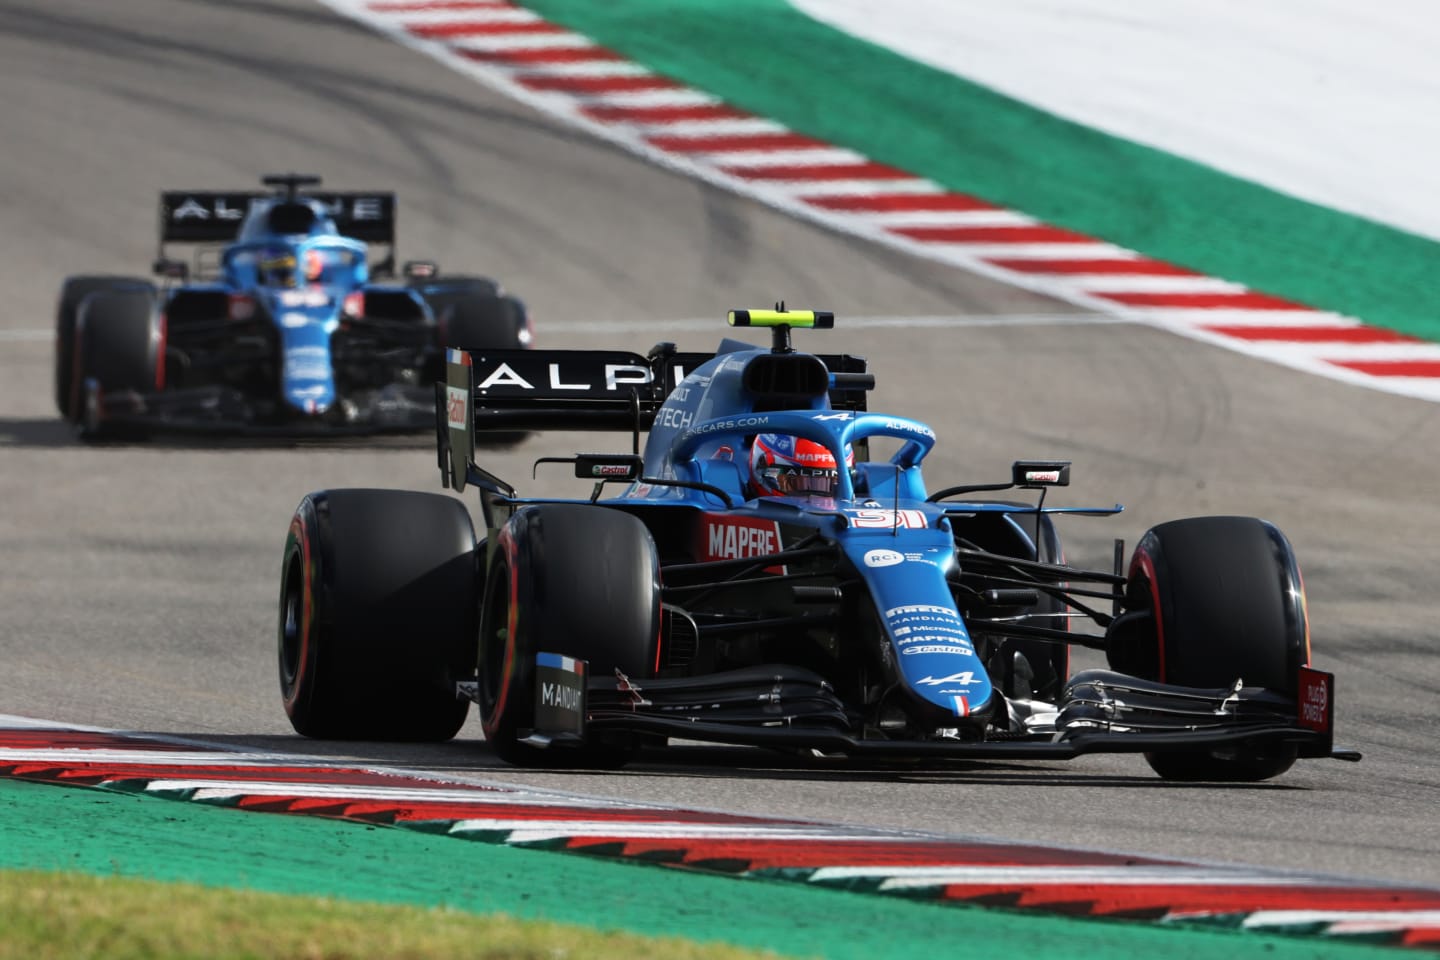 AUSTIN, TEXAS - OCTOBER 23: Esteban Ocon of France driving the (31) Alpine A521 Renault during qualifying ahead of the F1 Grand Prix of USA at Circuit of The Americas on October 23, 2021 in Austin, Texas. (Photo by Chris Graythen/Getty Images)